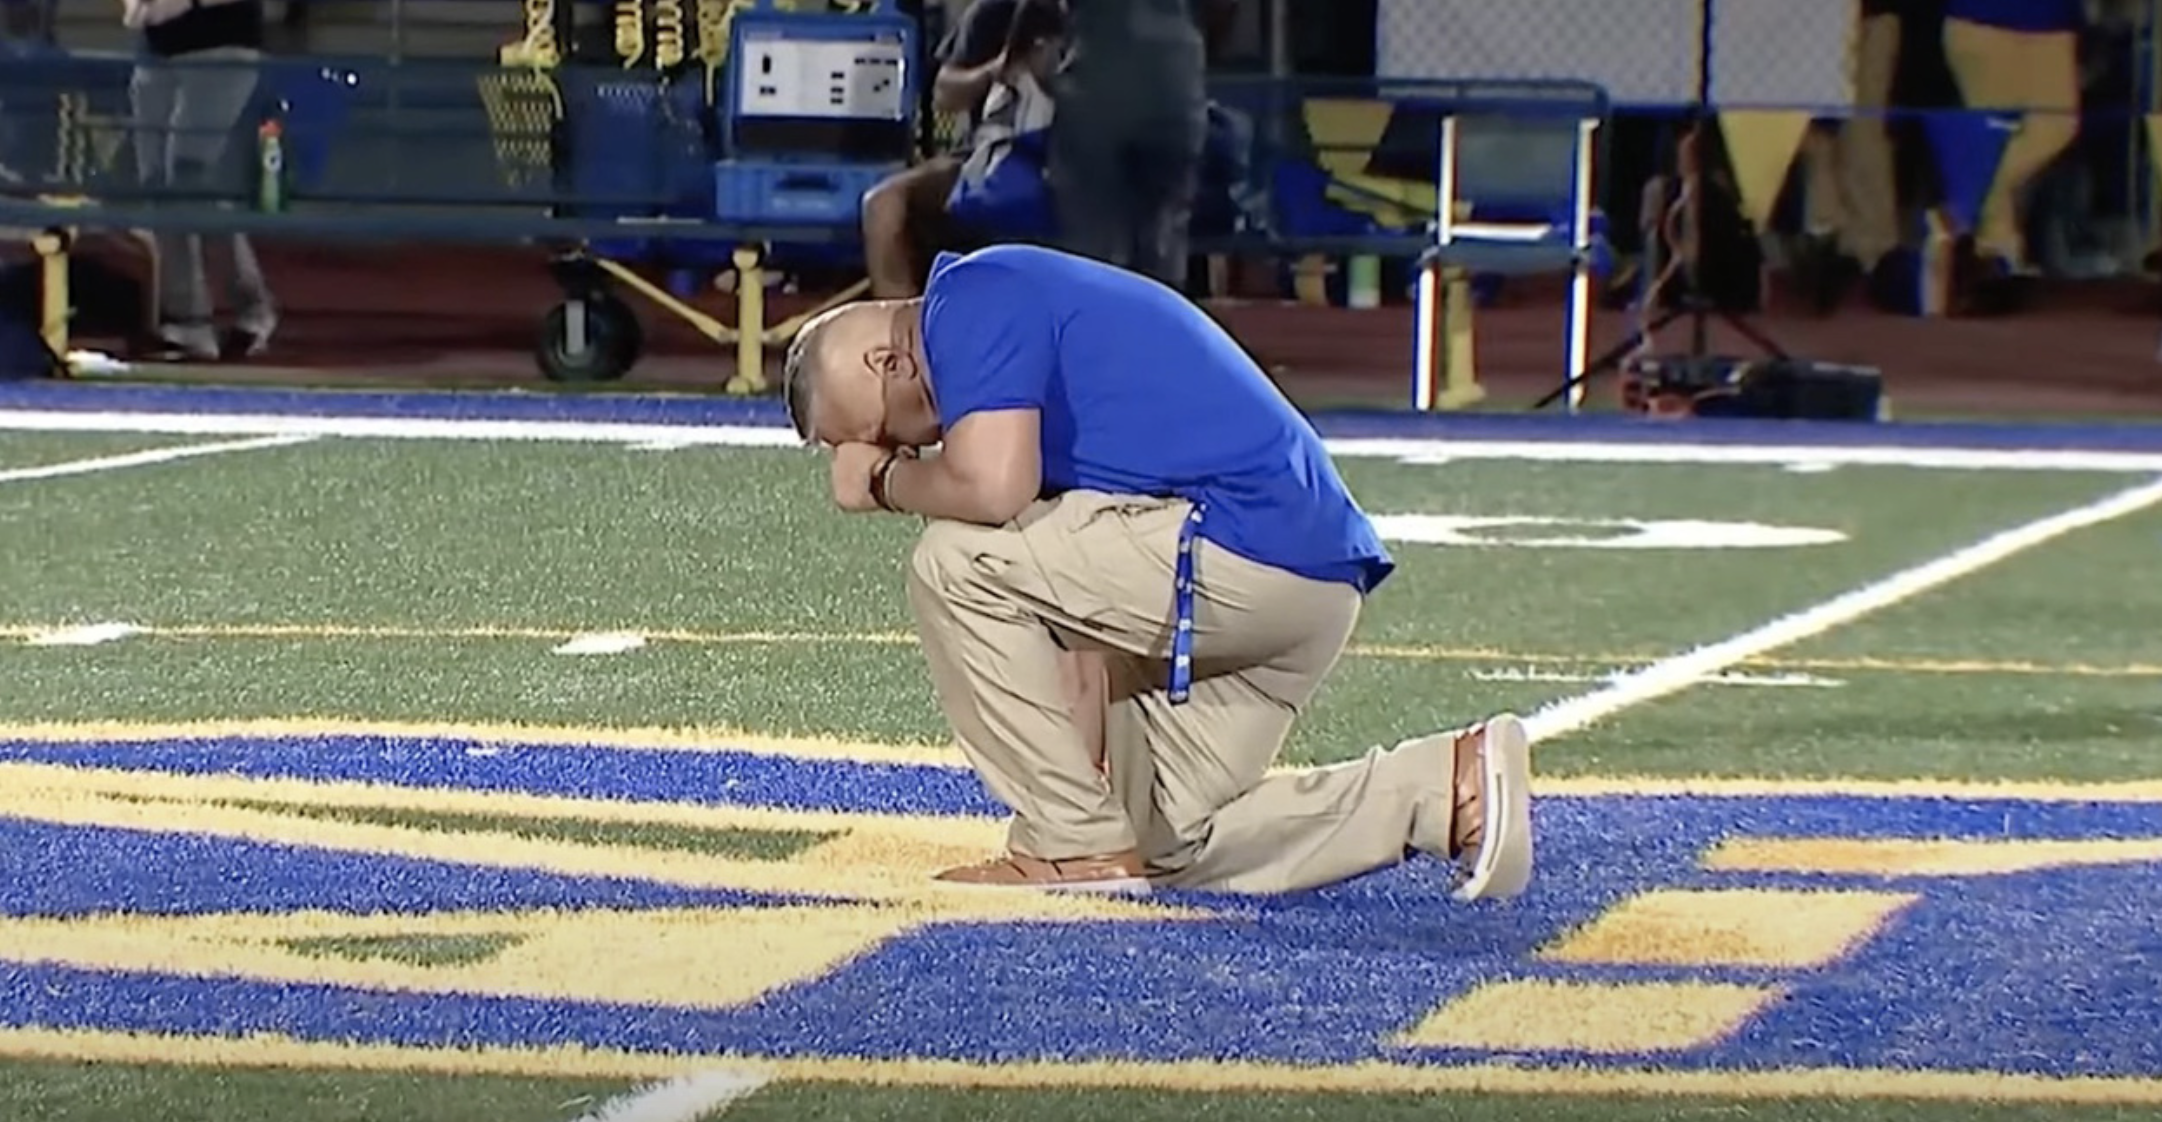 Coach Kennedy kneels after foodball game